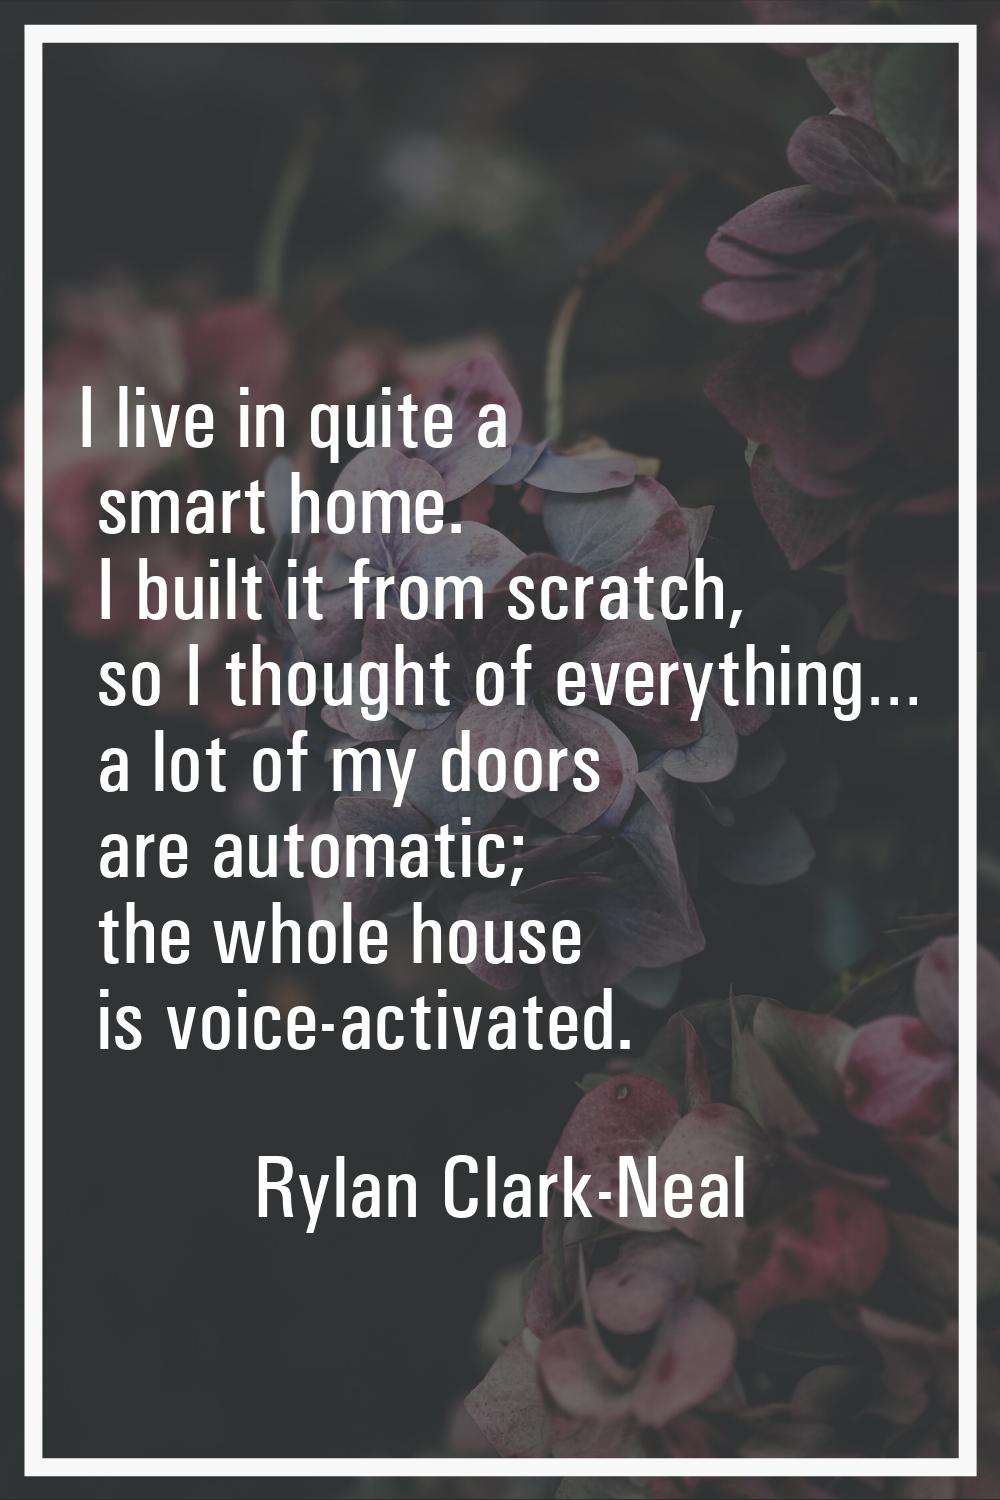 I live in quite a smart home. I built it from scratch, so I thought of everything… a lot of my door